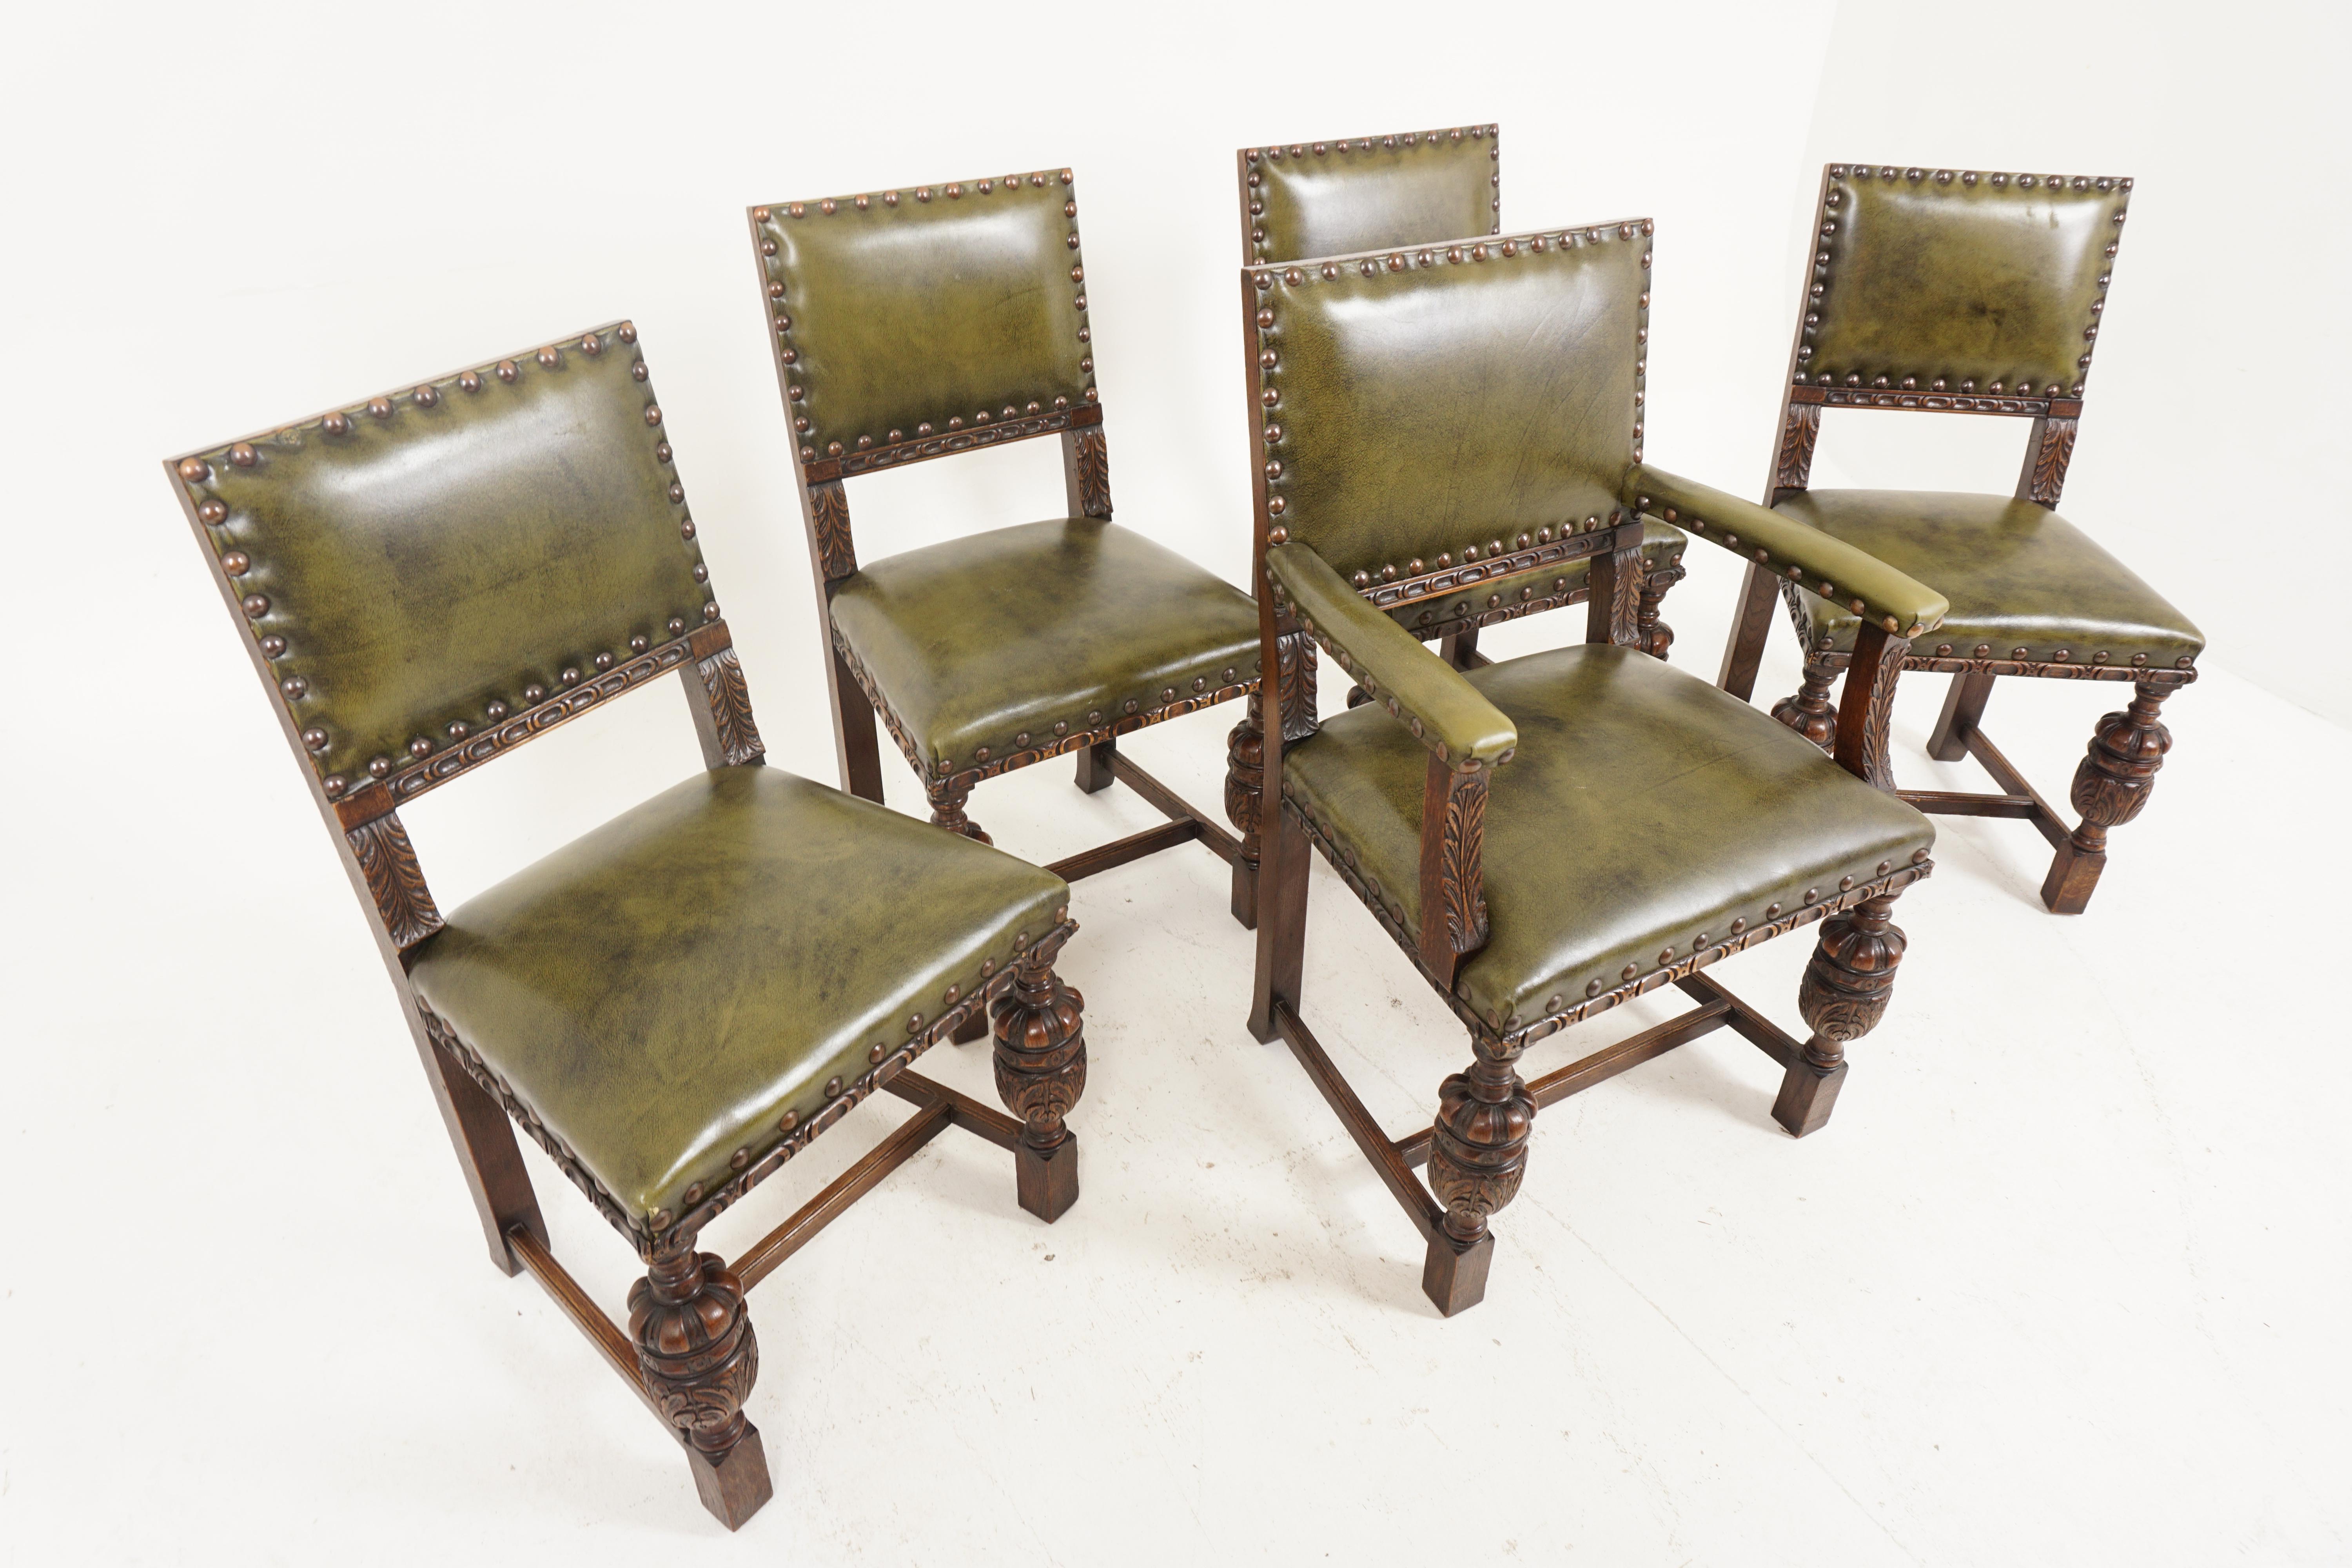 Antique set of 5 carved oak upholstered dining chairs, Scotland 1920, B2626A

Scotland 1920
Solid oak and leather
Original finish
Upholstered back with original studs
Large upholstered seat with carved moulding on 3 sides
Standing on large